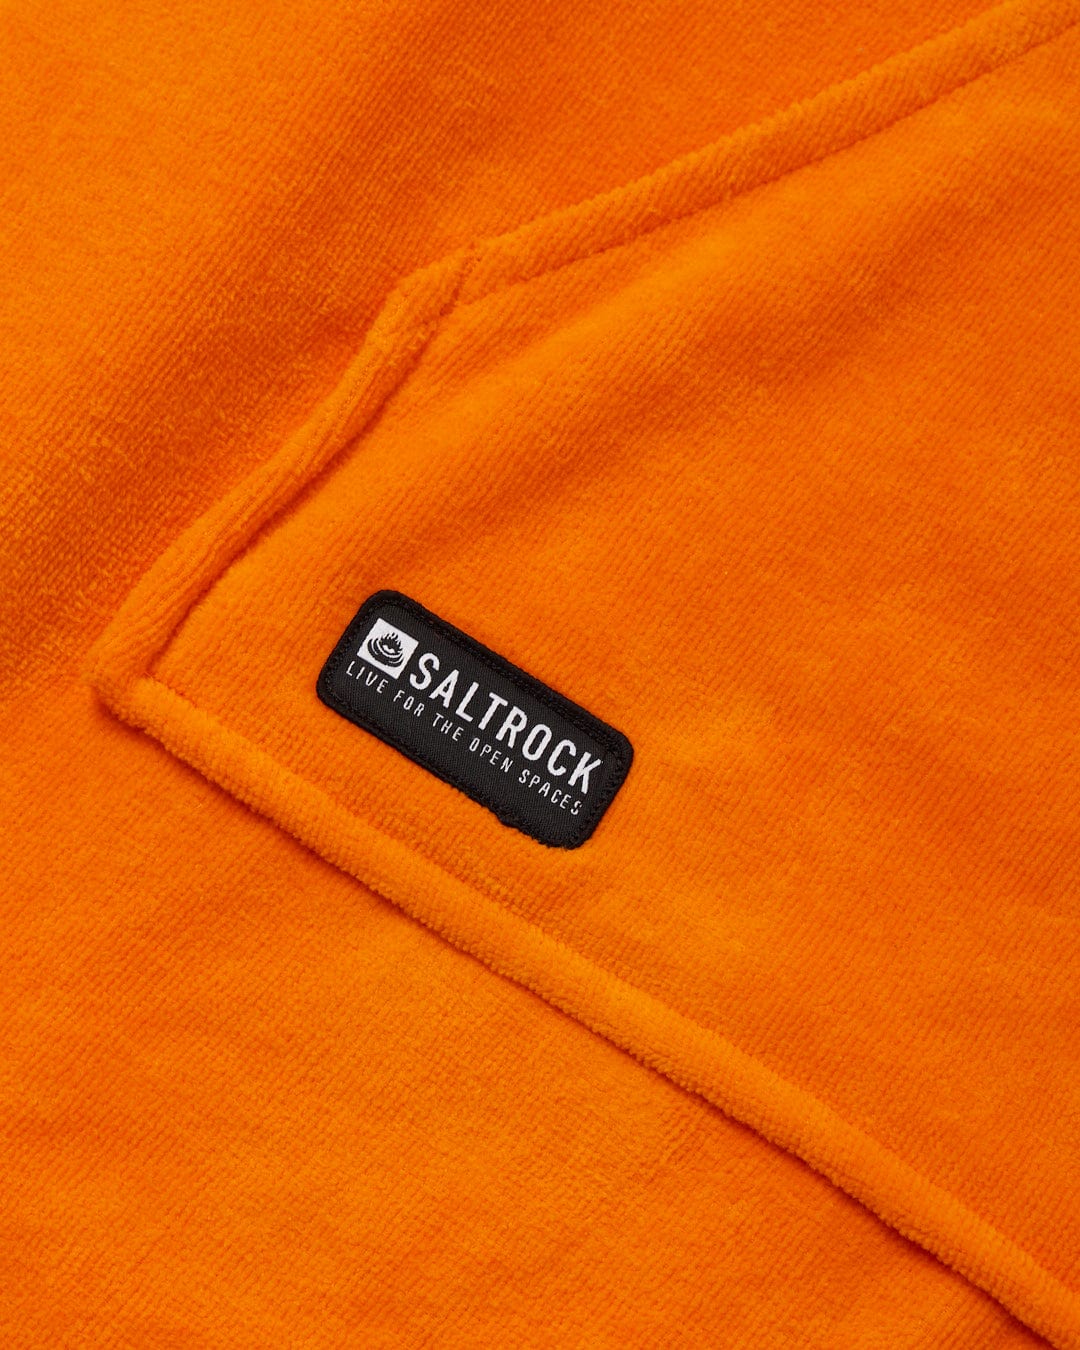 Close-up of a flamehead graphic on a Saltrock Corp Changing Towel - Orange label on an orange fabric made of fast-drying cotton towelling material.